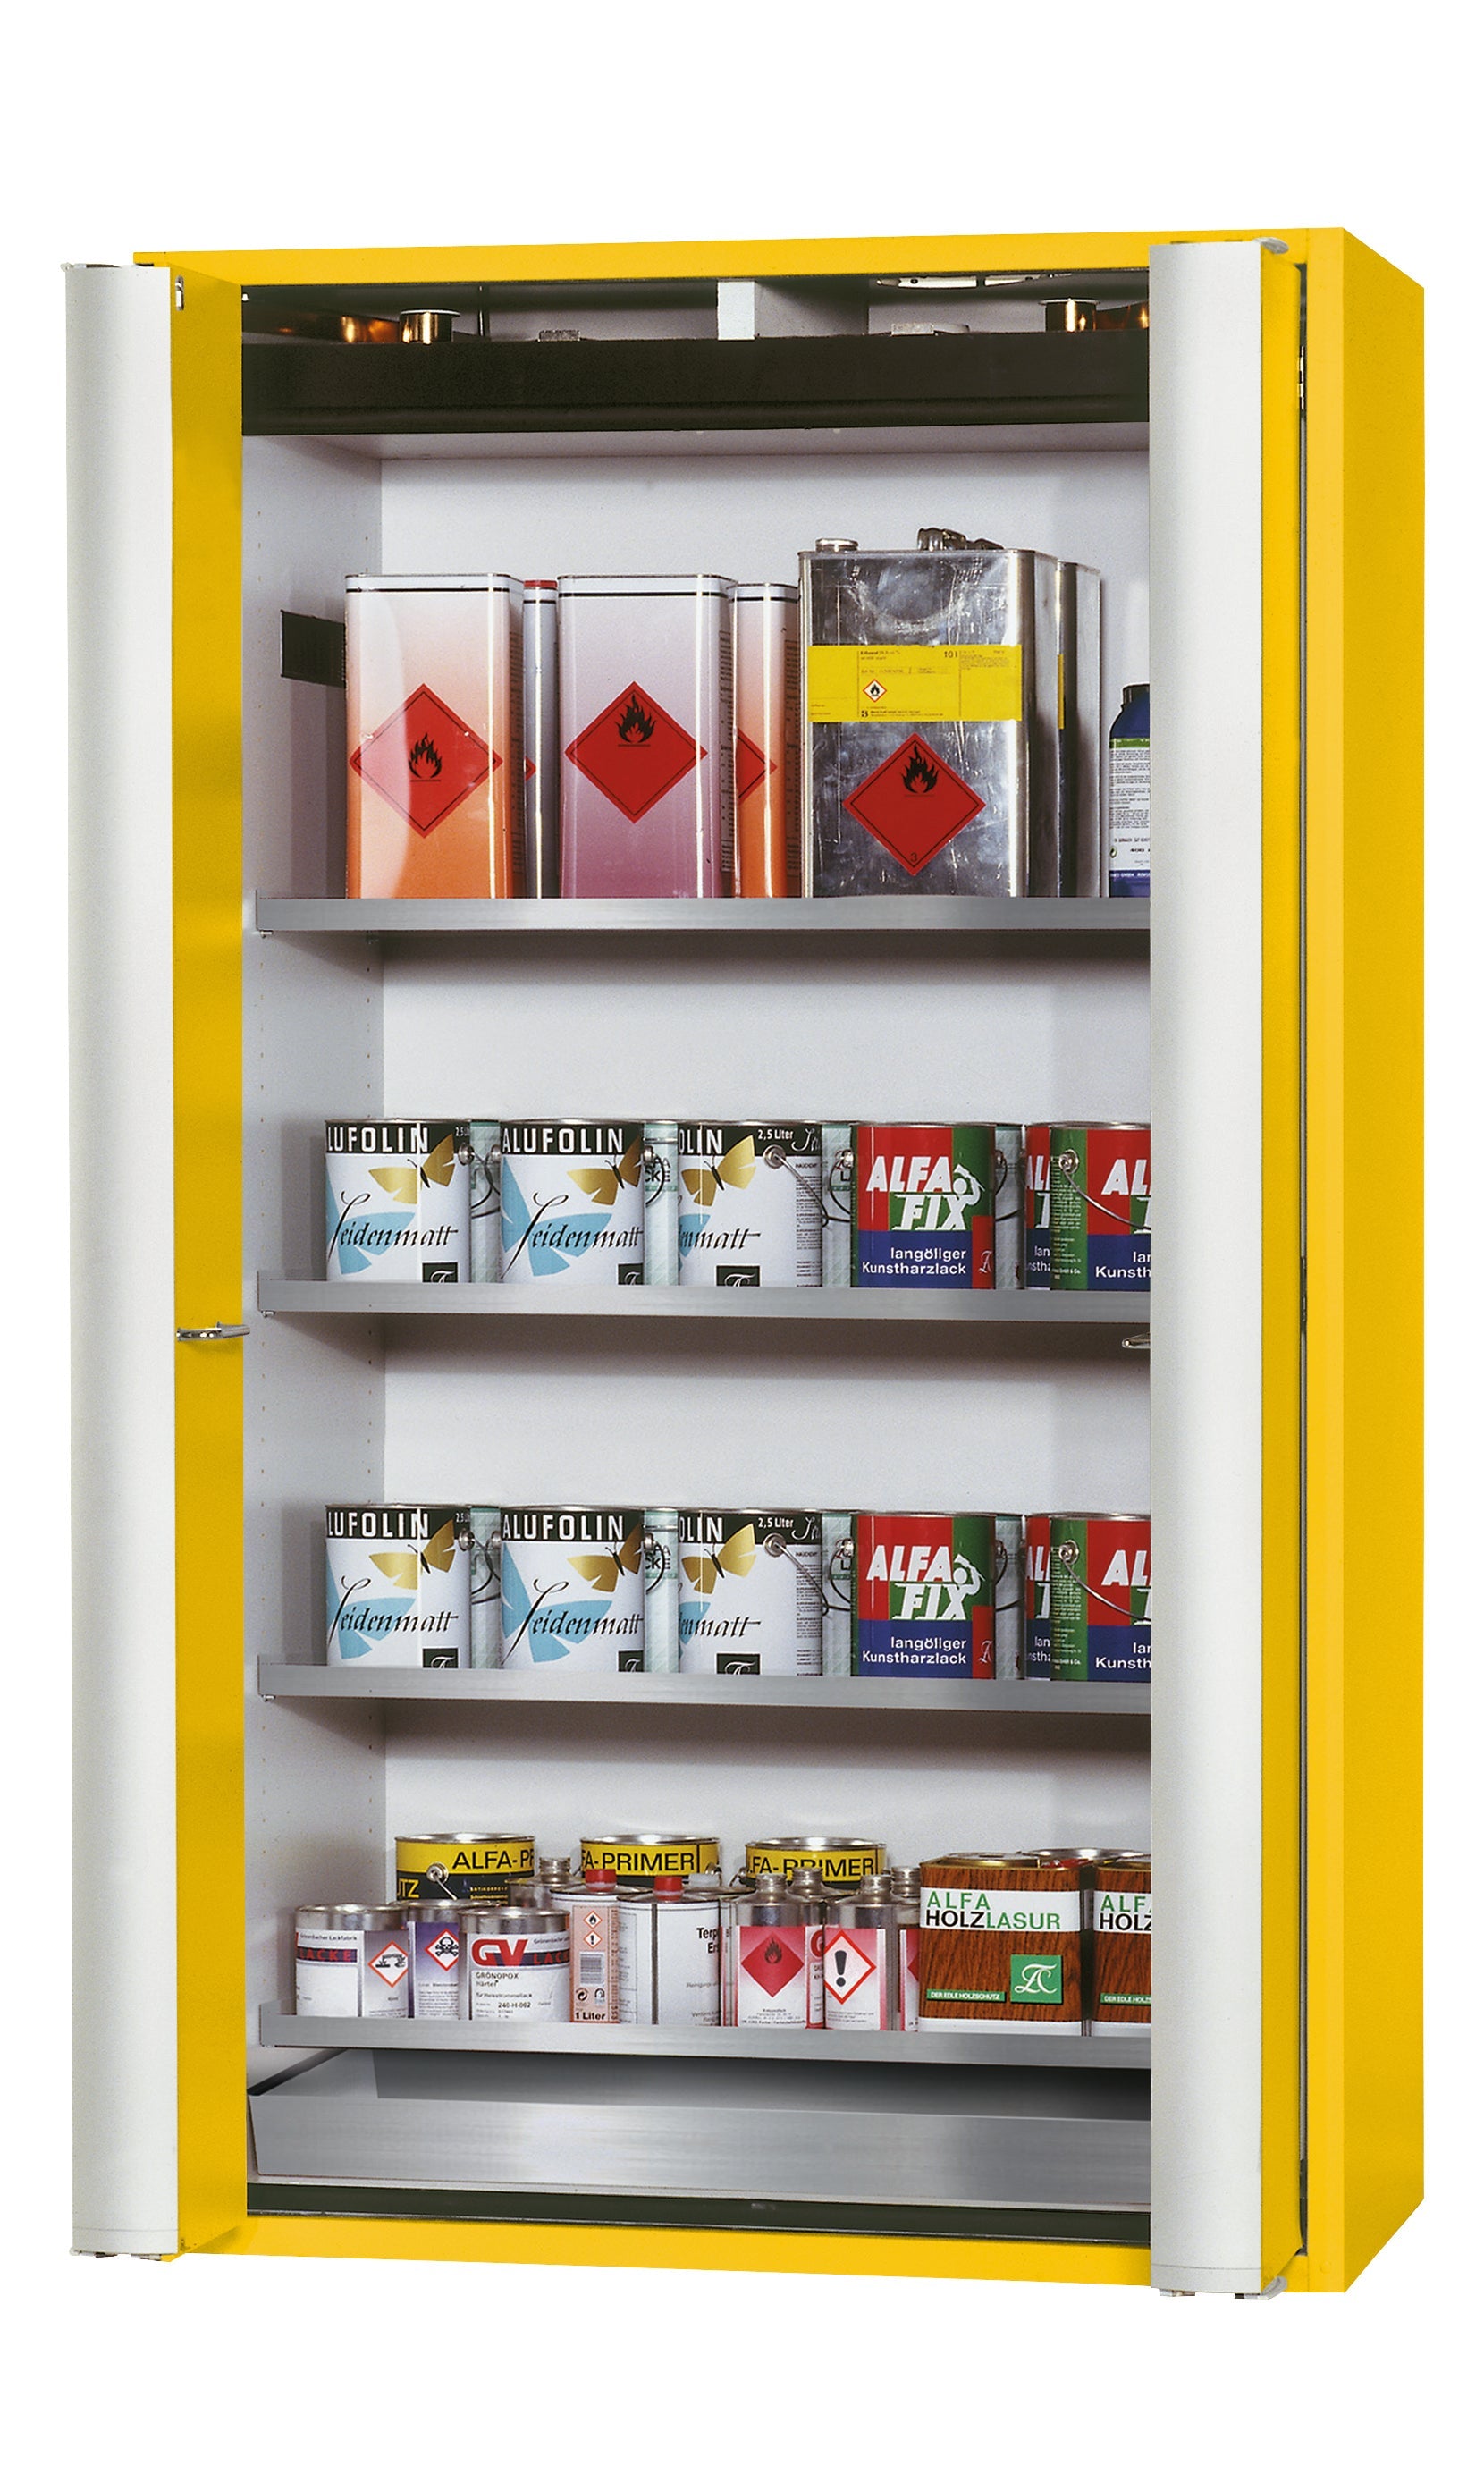 Type 90 safety storage cabinet S-PHOENIX-90 model S90.196.120.FDAS in warning yellow RAL 1004 with 4x shelf standard (stainless steel 1.4301),